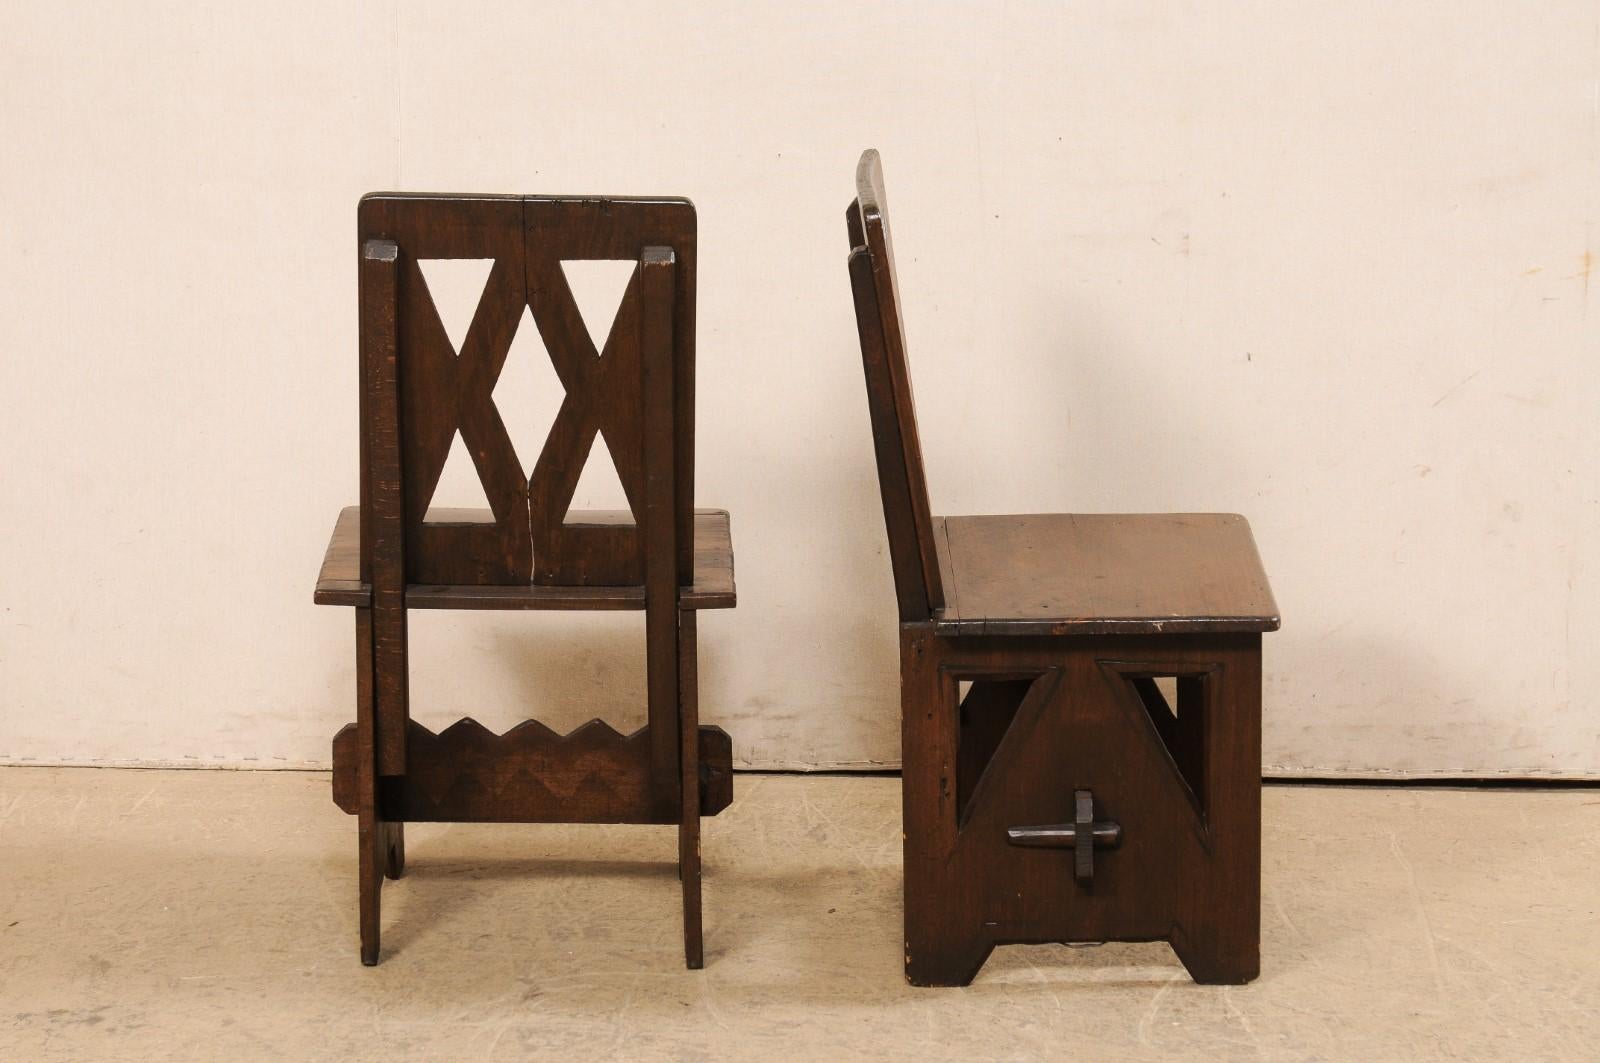 Interesting Pair of Carved Fire-Side Chairs W/Geometric Cut-Outs, N. Africa 2